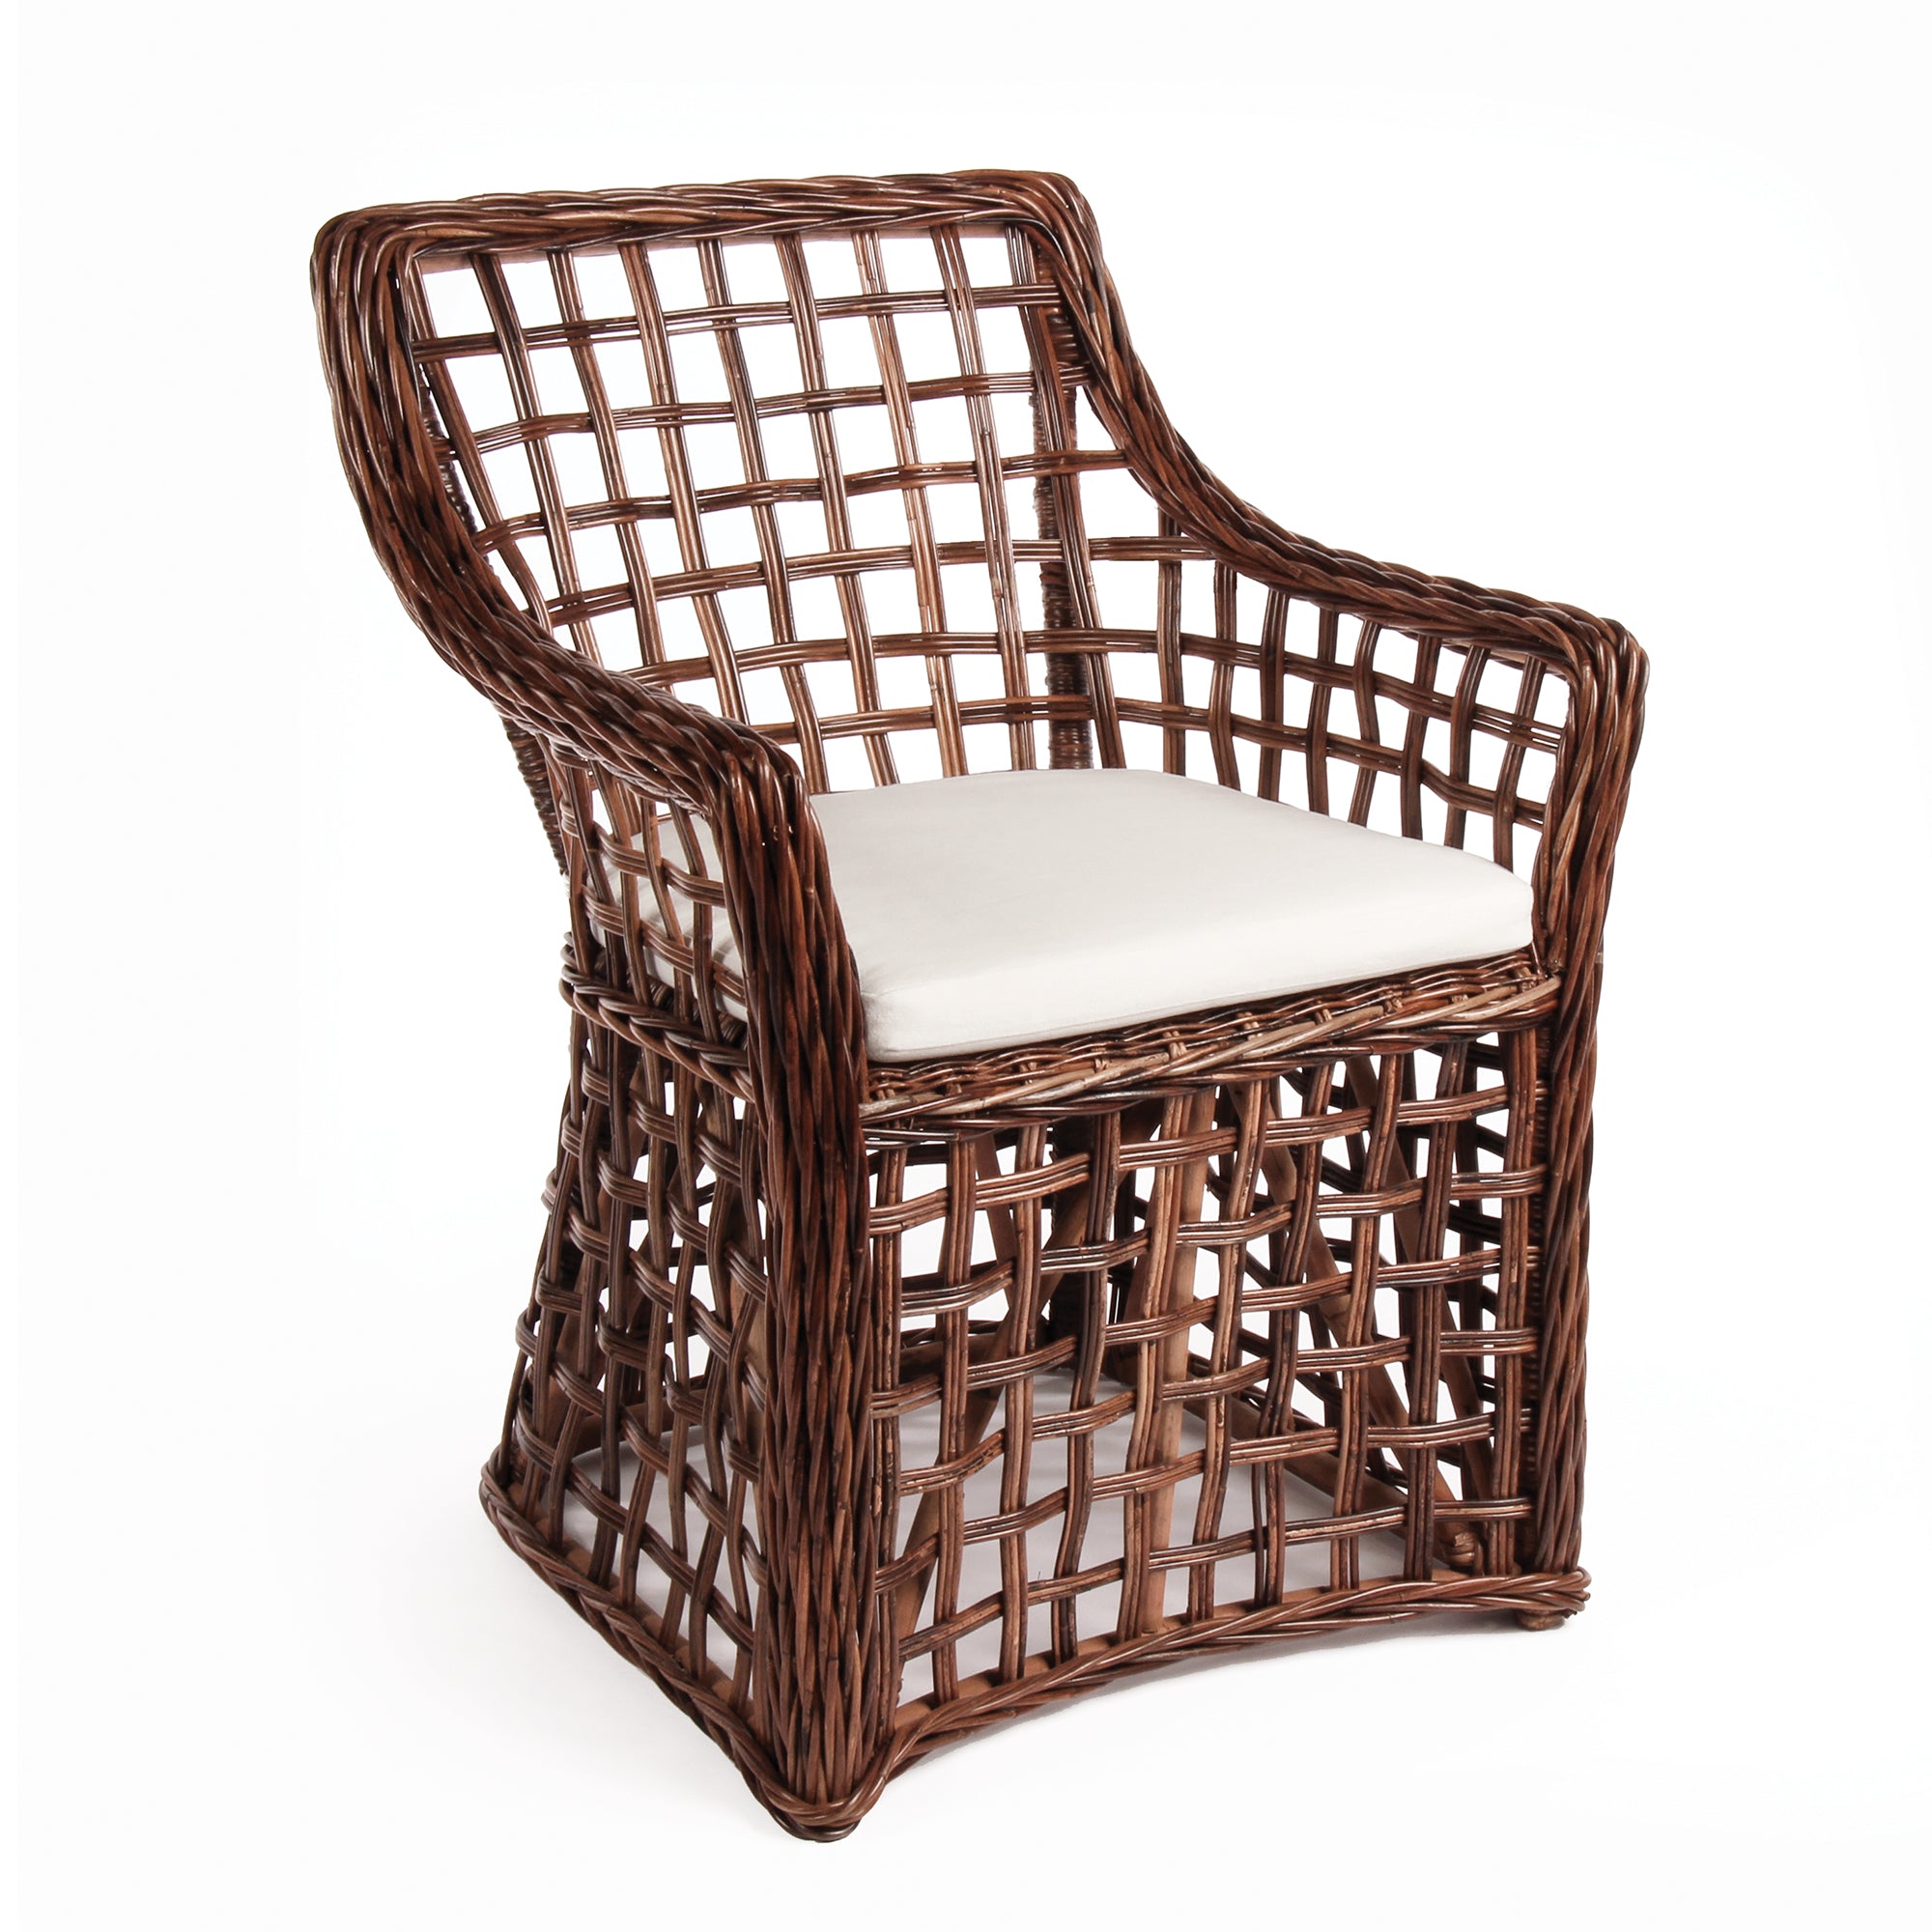 The open weave of this rattan armchair is a shining example of centuries old craftsmanship. Made by some of the world's most accomplished weavers, the Normandy collection is five-star rattan. Amethyst Home provides interior design, new construction, custom furniture, and area rugs in the Newport Beach metro area.